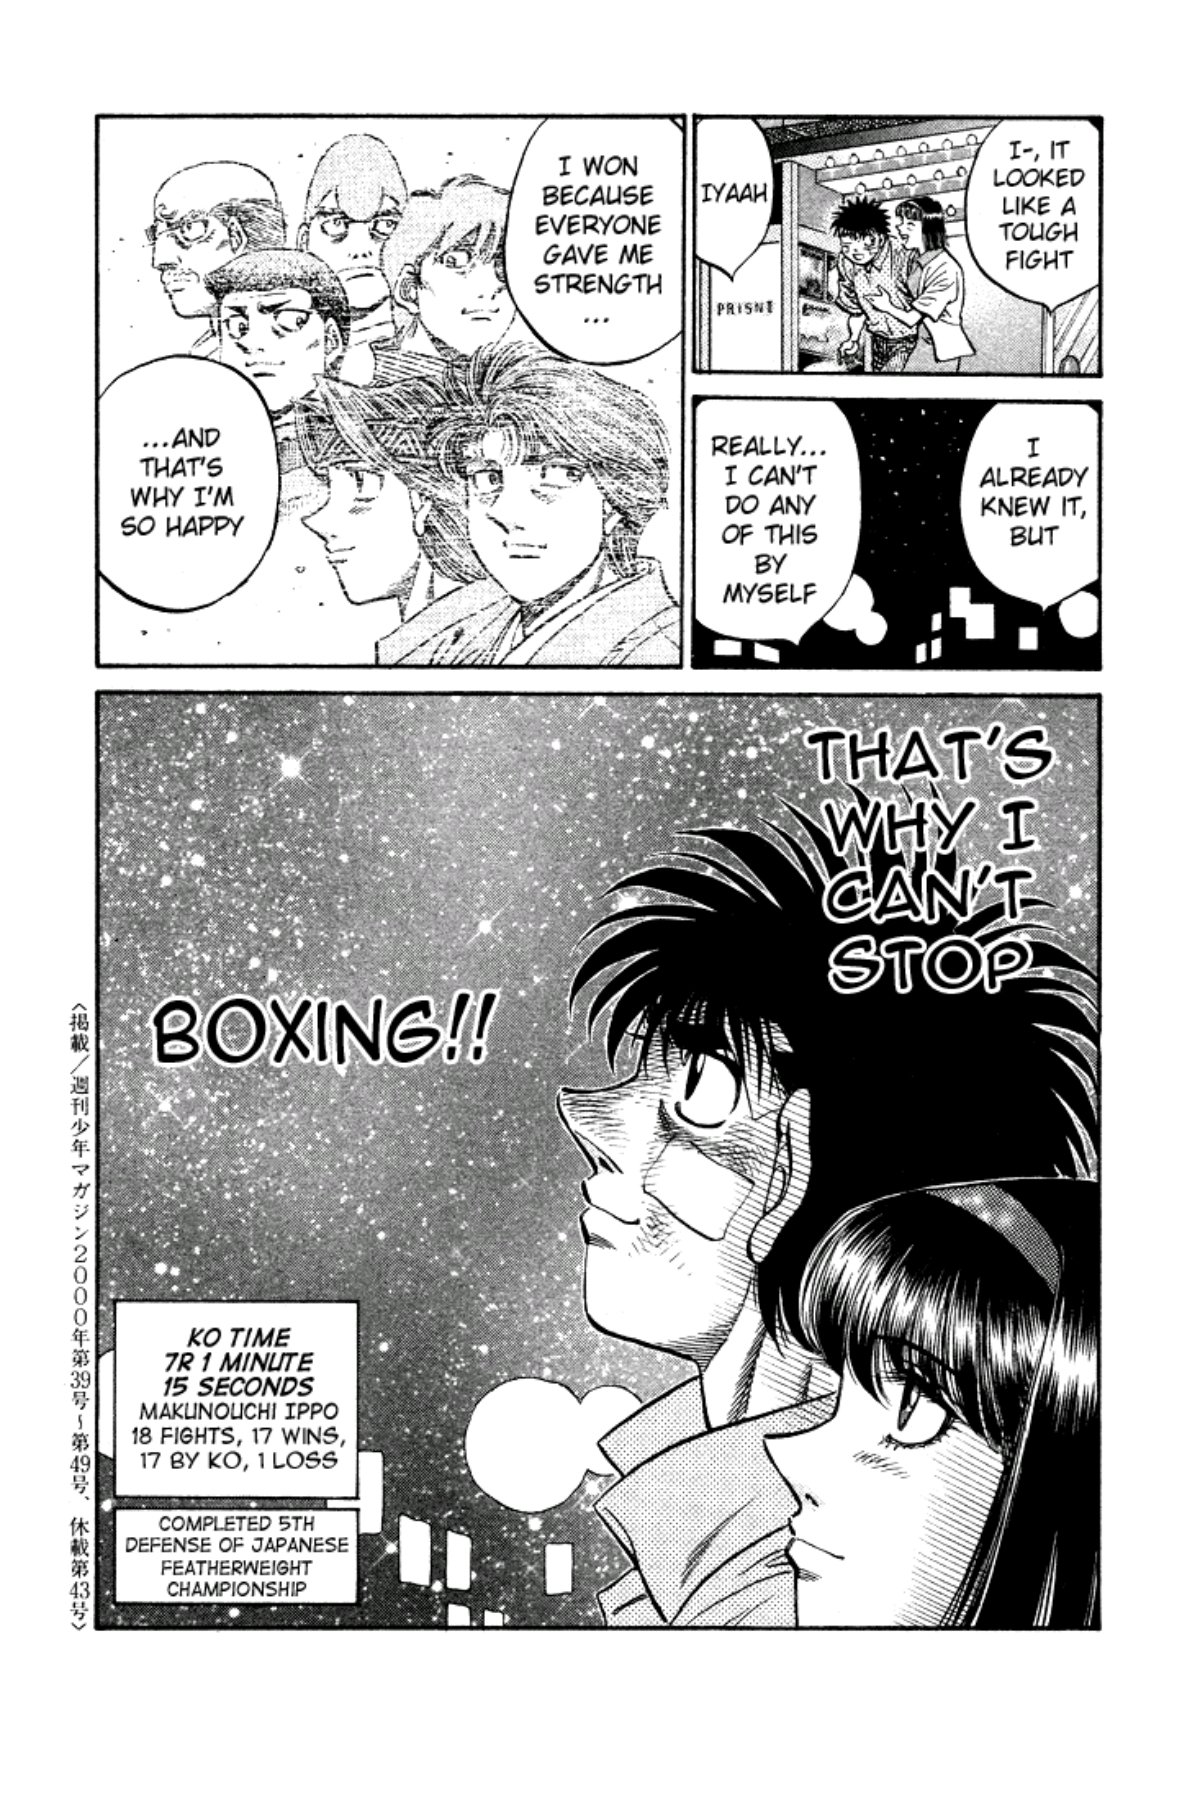 Ippo reflects on everyone who has helped him to come this far. He tells Kumi that he cannot do any of this by himself, and thinks on how much he loves boxing. His record is 18 fights, 17 wins, 1 loss.